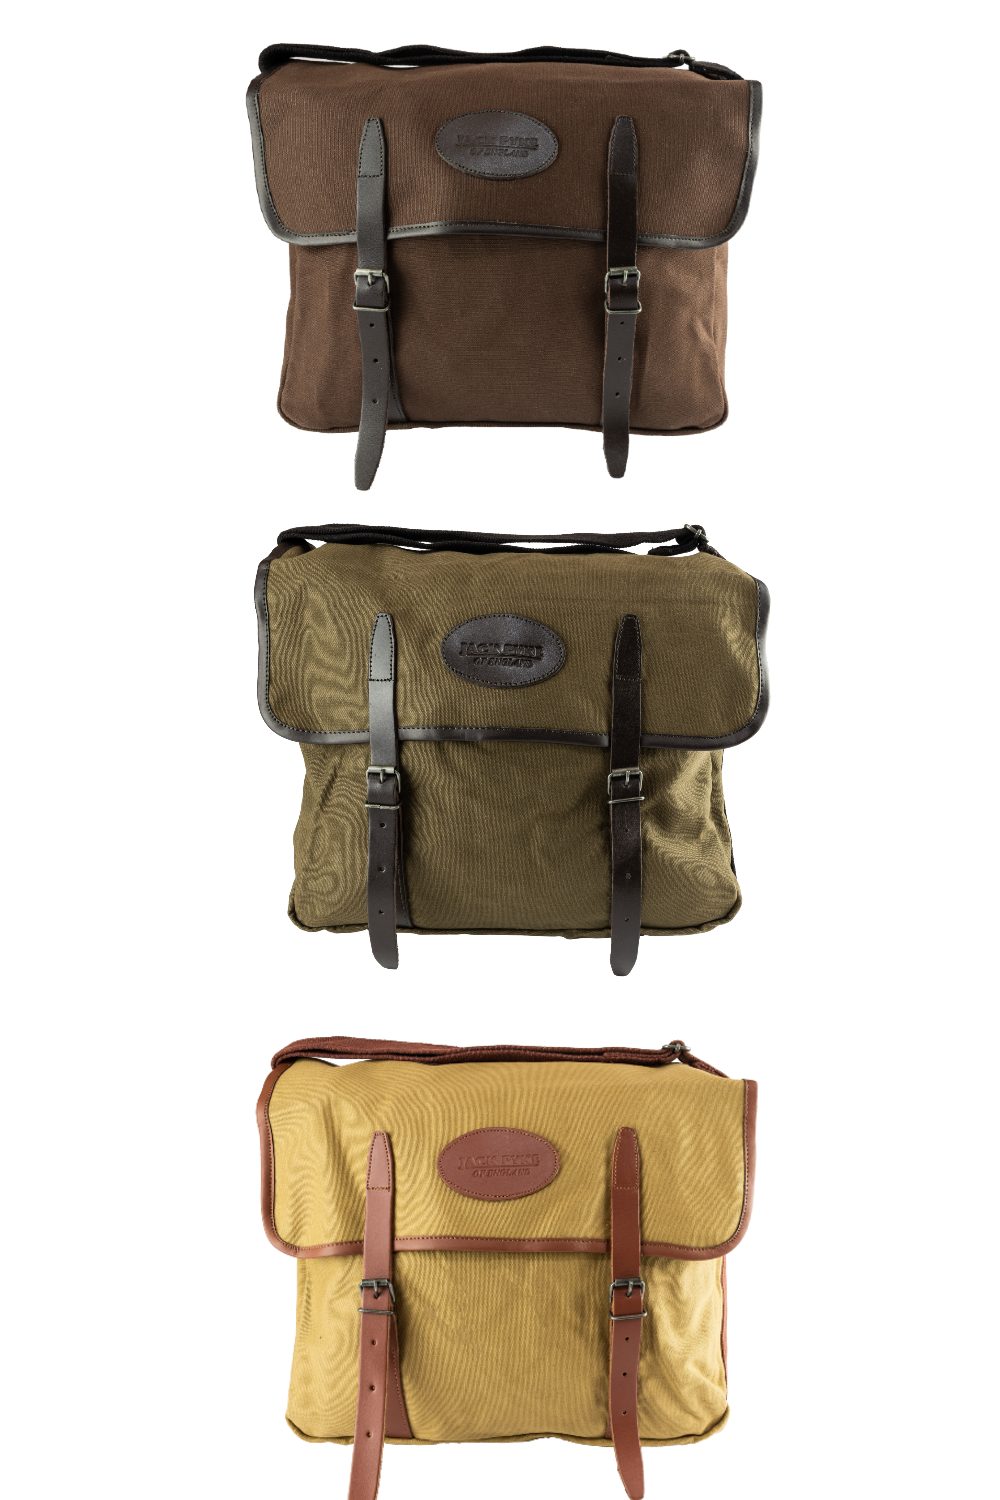 Jack Pyke Canvas Dog Bag in Brown, Green and Fawn 